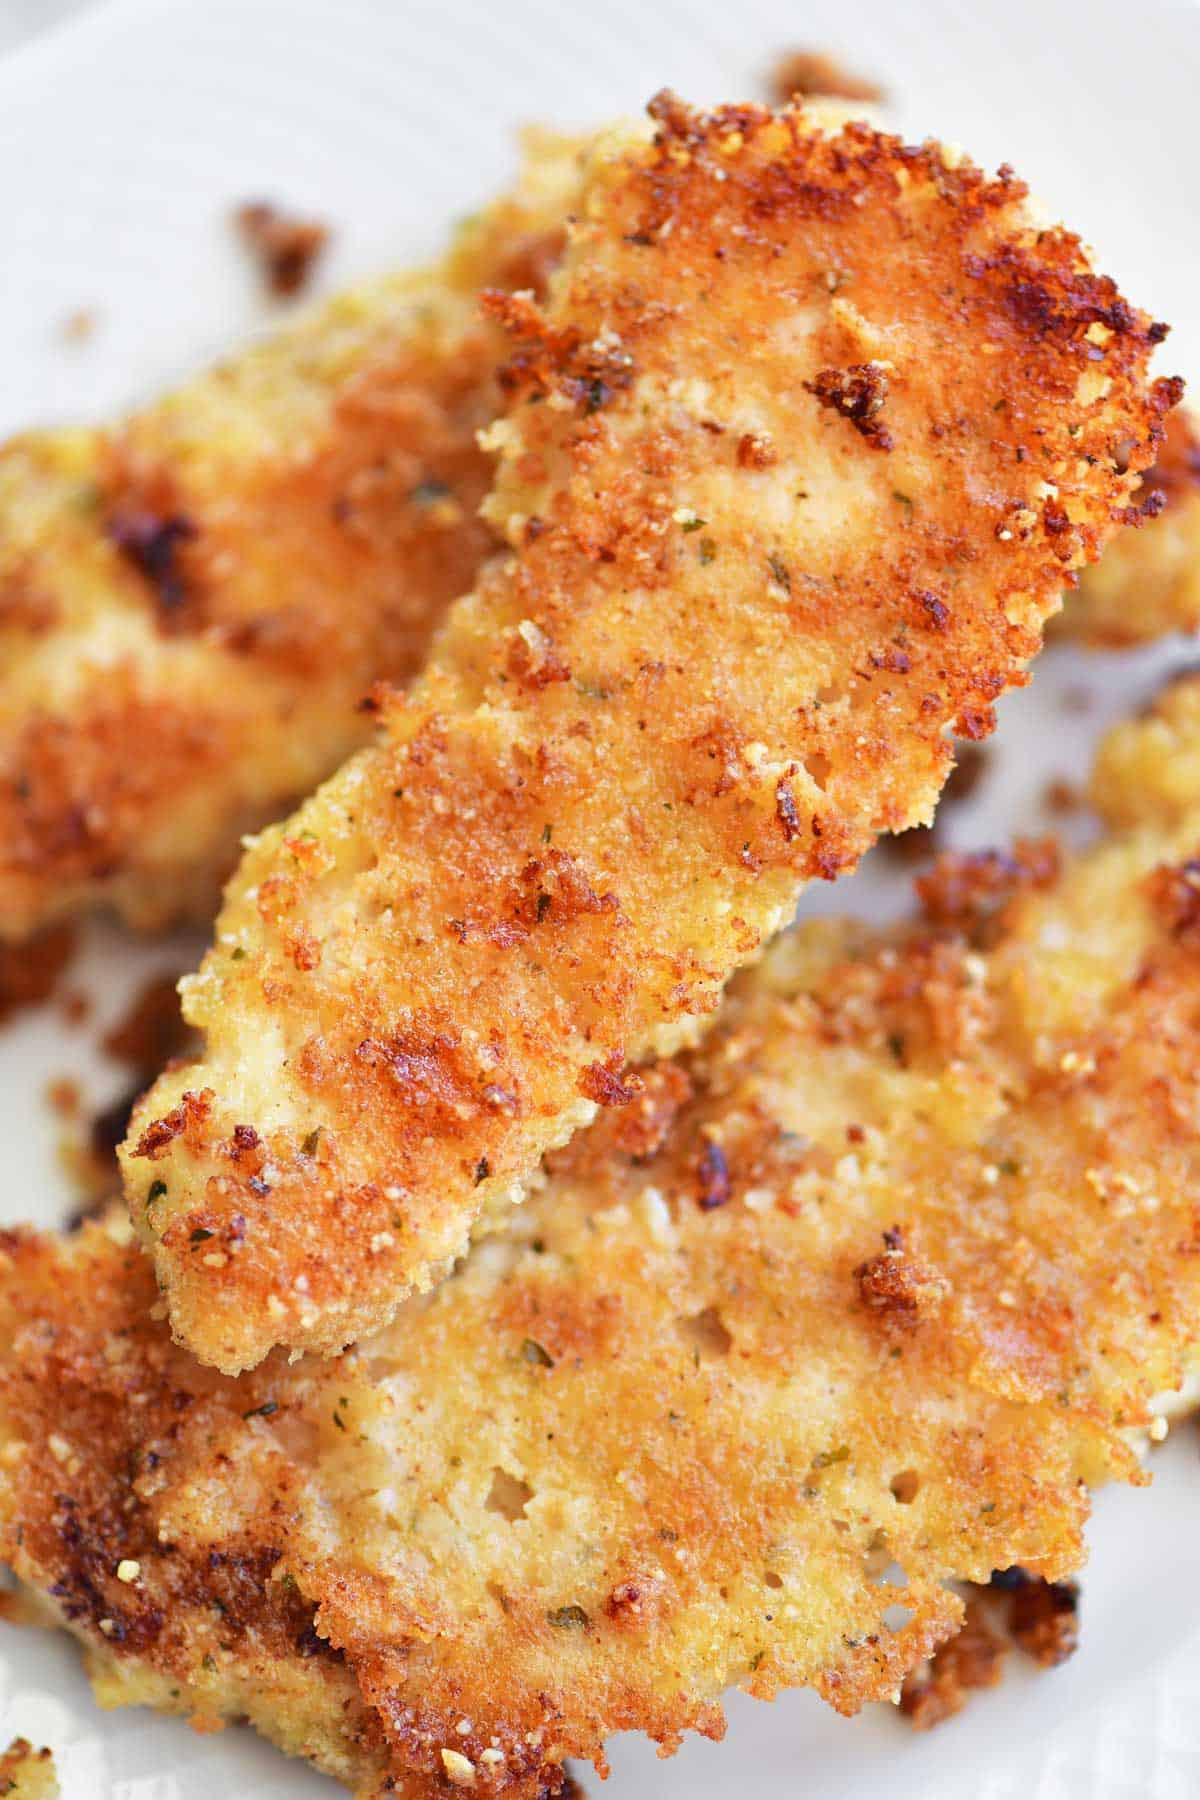 Recipes With Chicken Tenders
 Garlic Parmesan Chicken Tenders The Gunny Sack